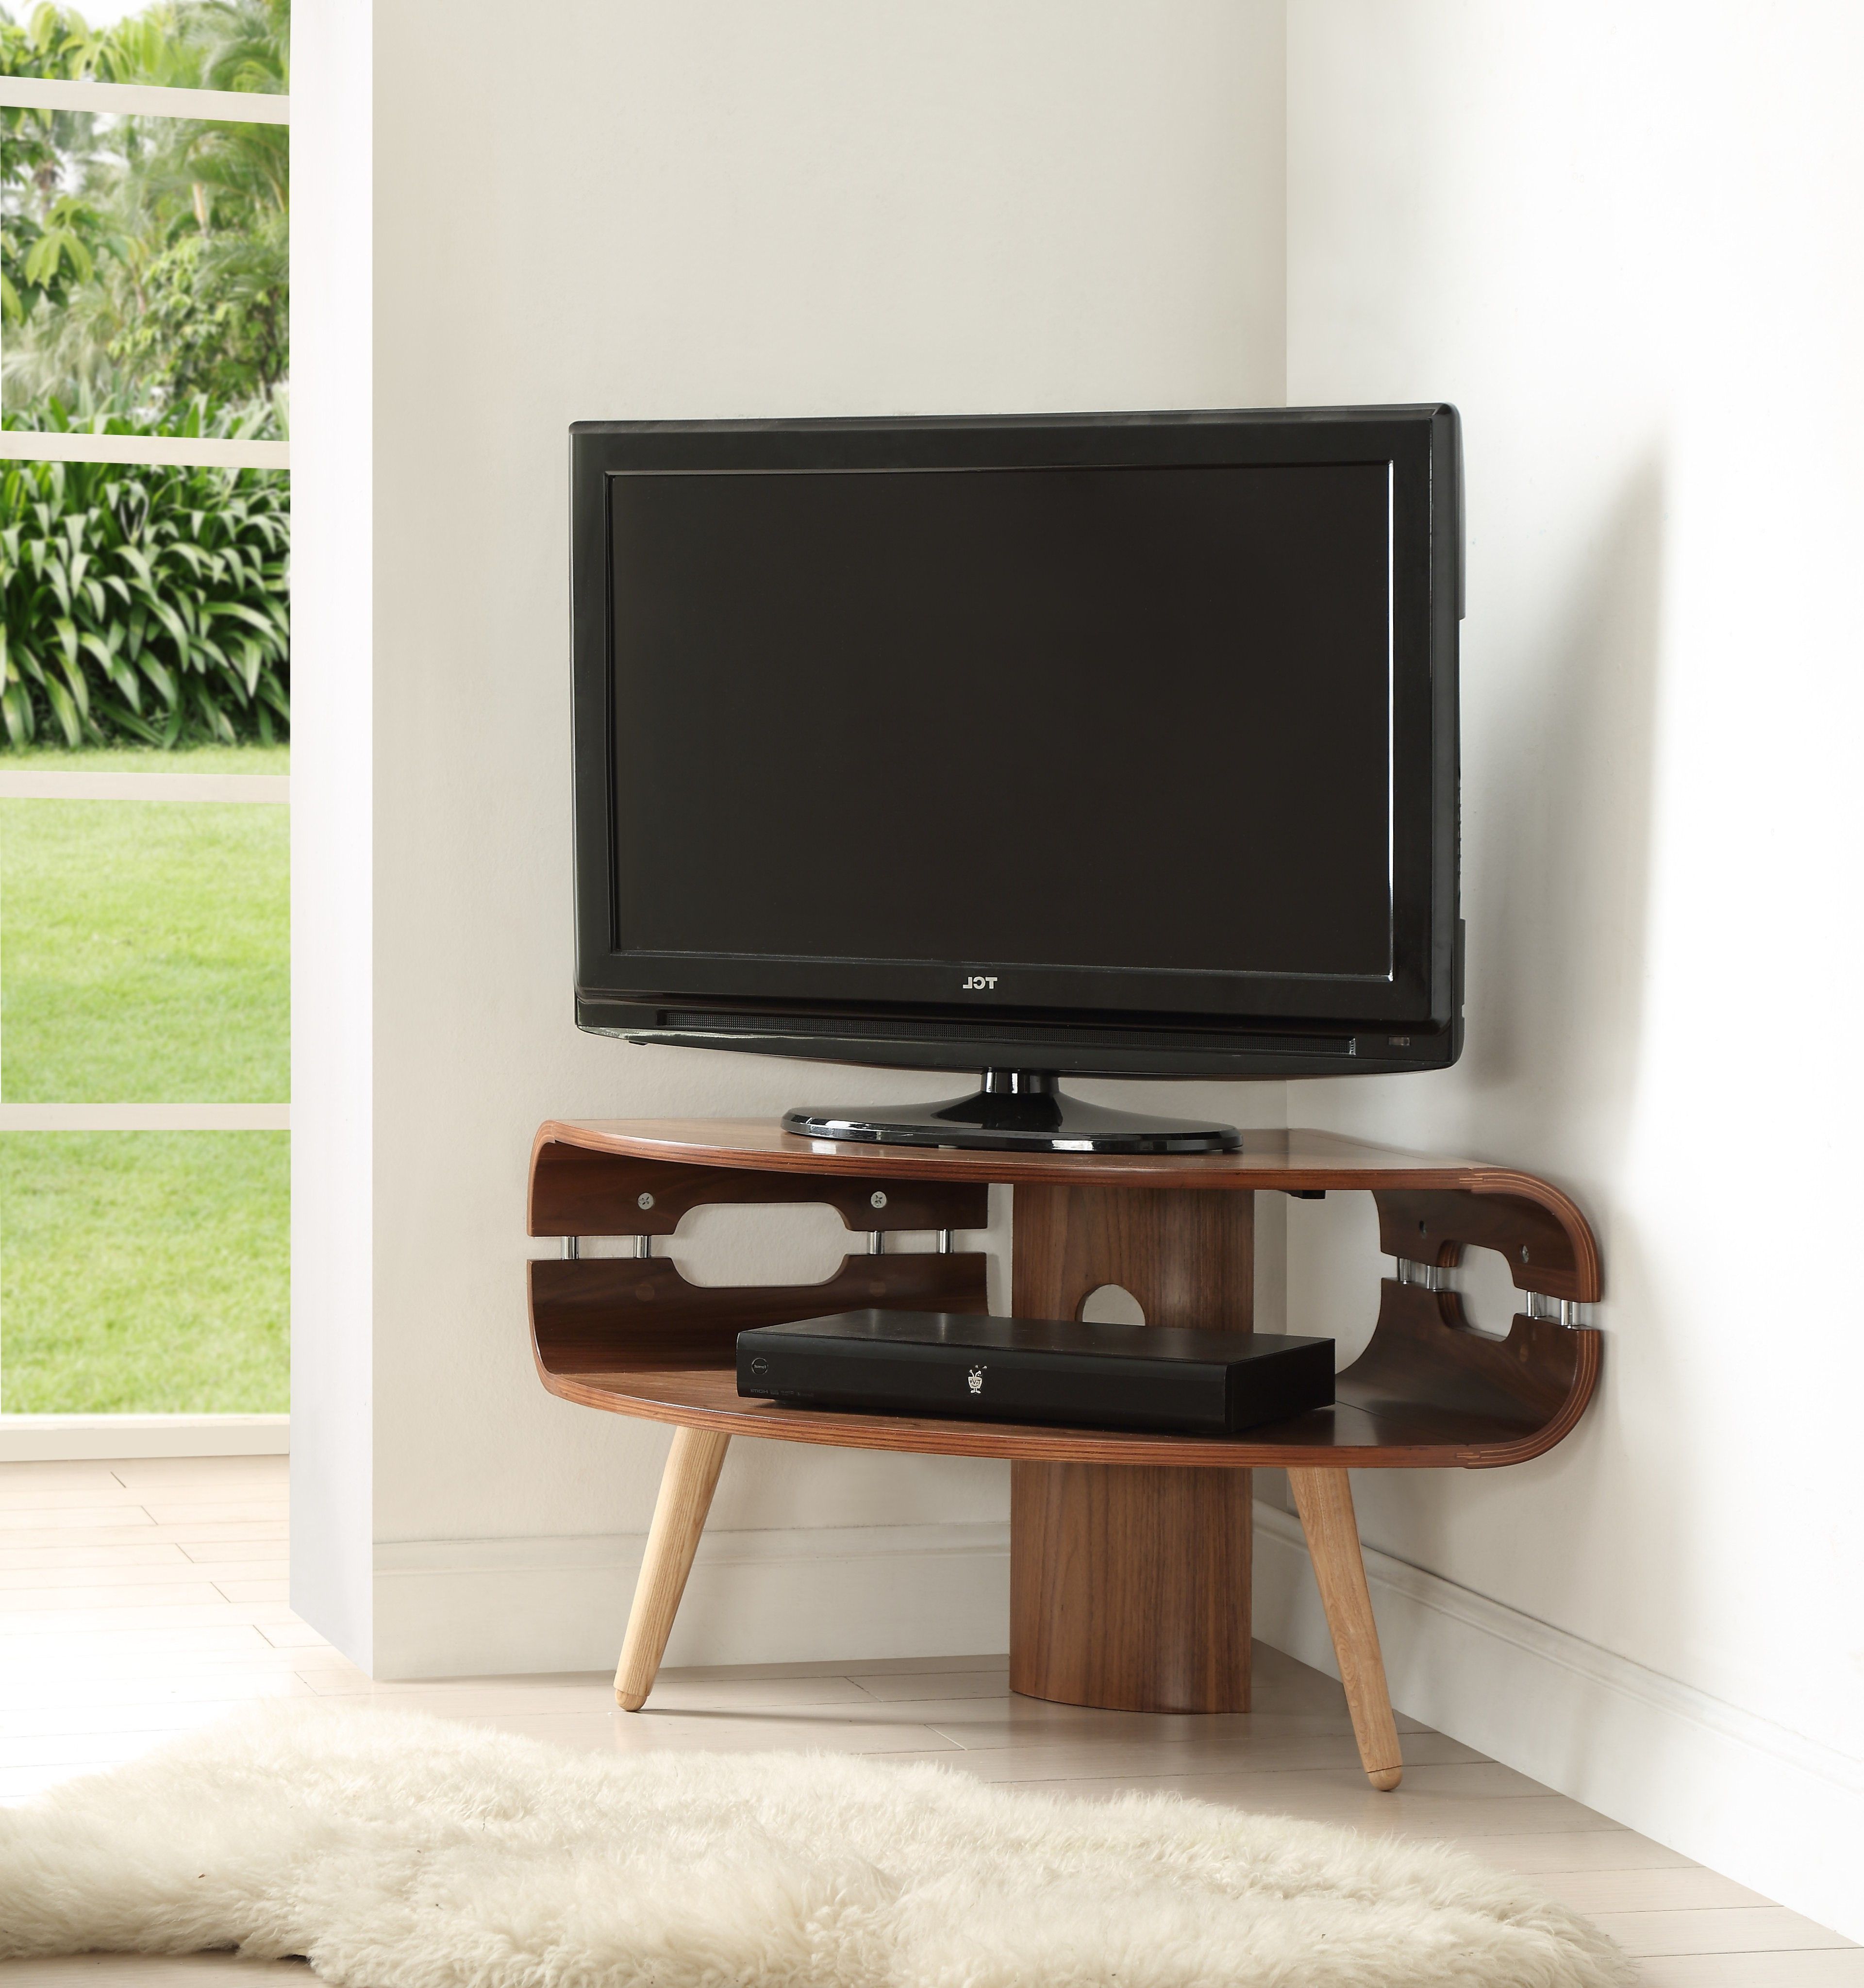 Best And Newest Unique Corner Tv Stands In Jf701 Corner Tv Stand – Cooks (View 1 of 20)